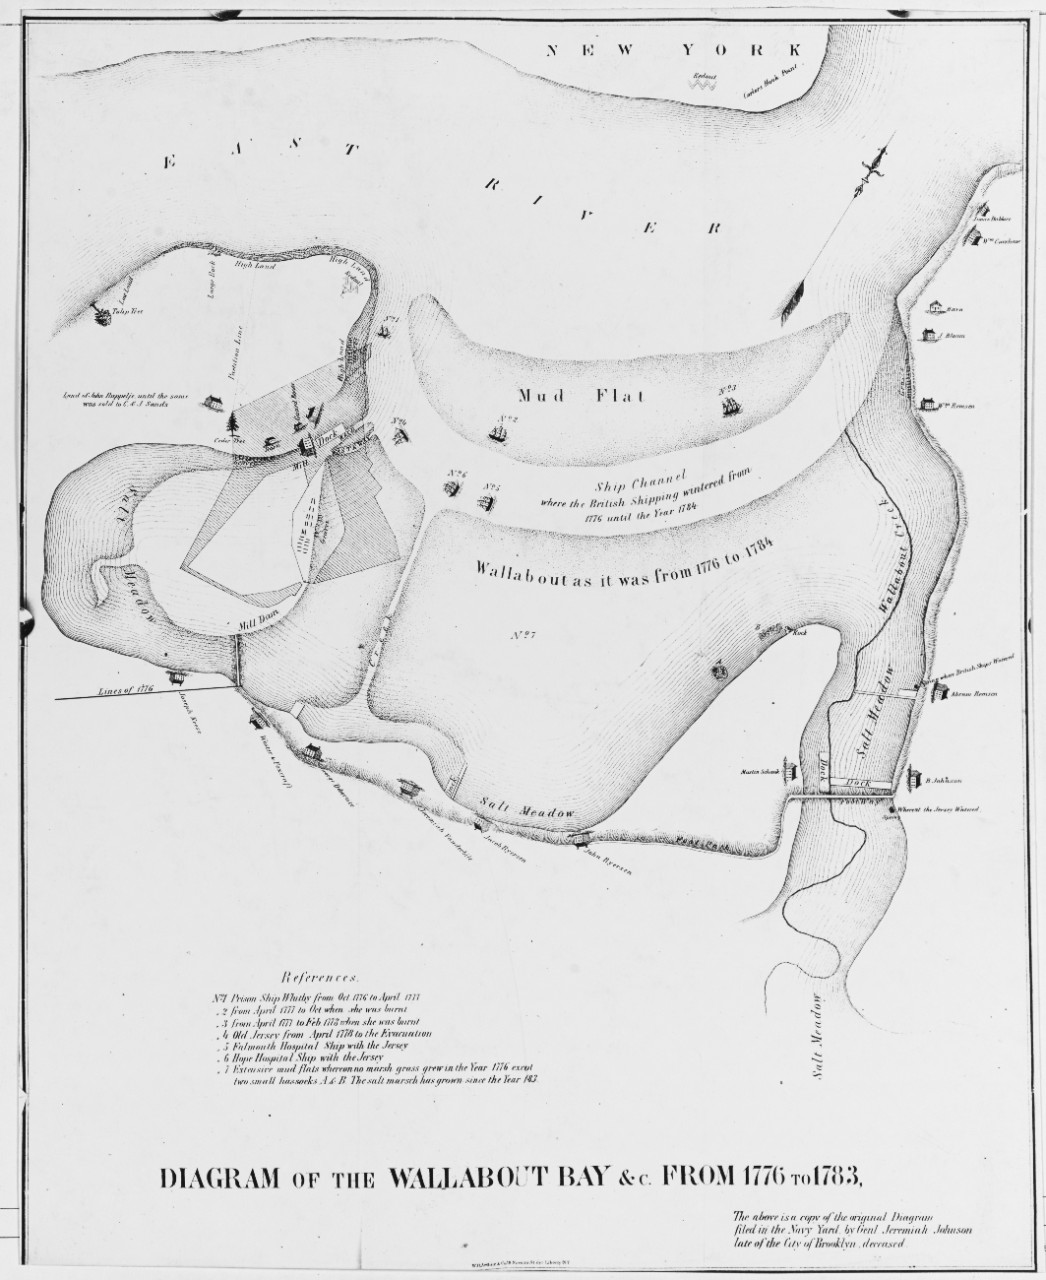 Chart of the Wallabout Bay (Brooklyn), New York, 1776-1783.